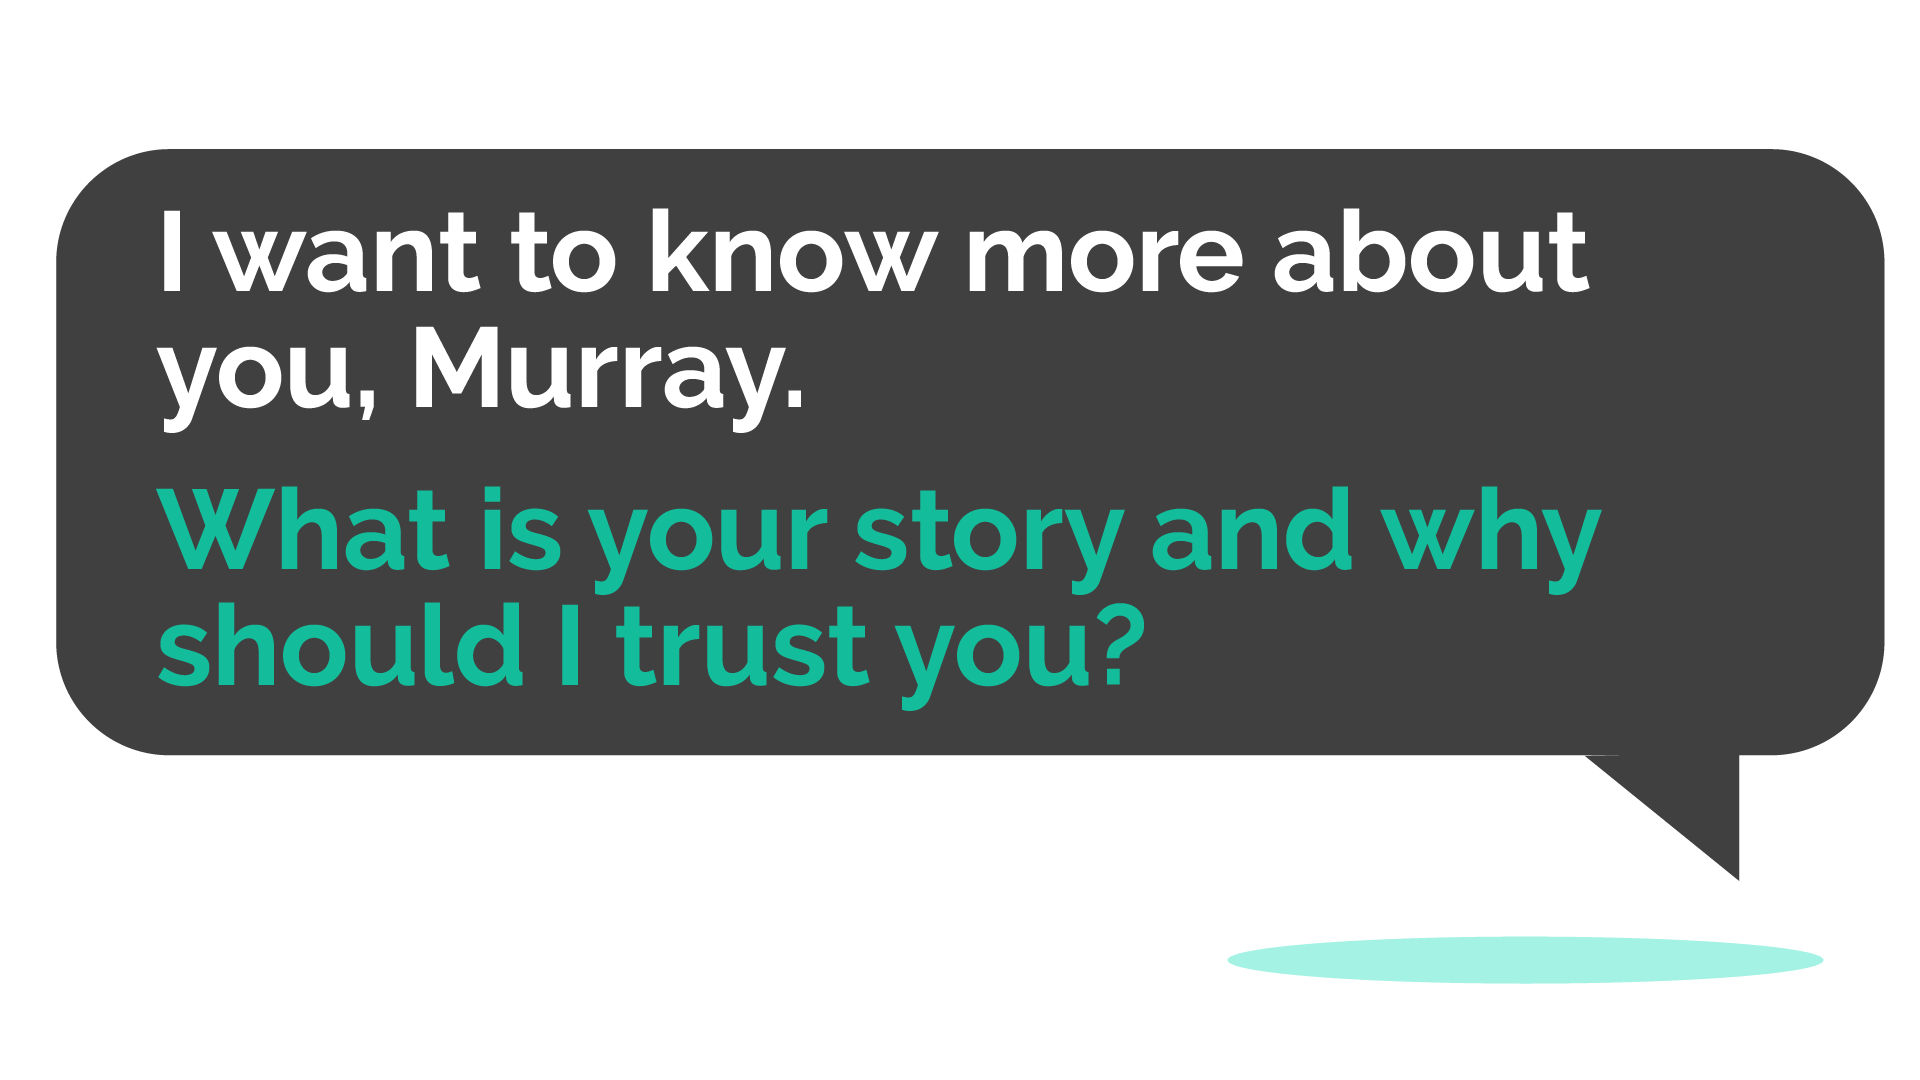 I want to know more about you, Murray. What is your story and why should I trust you?